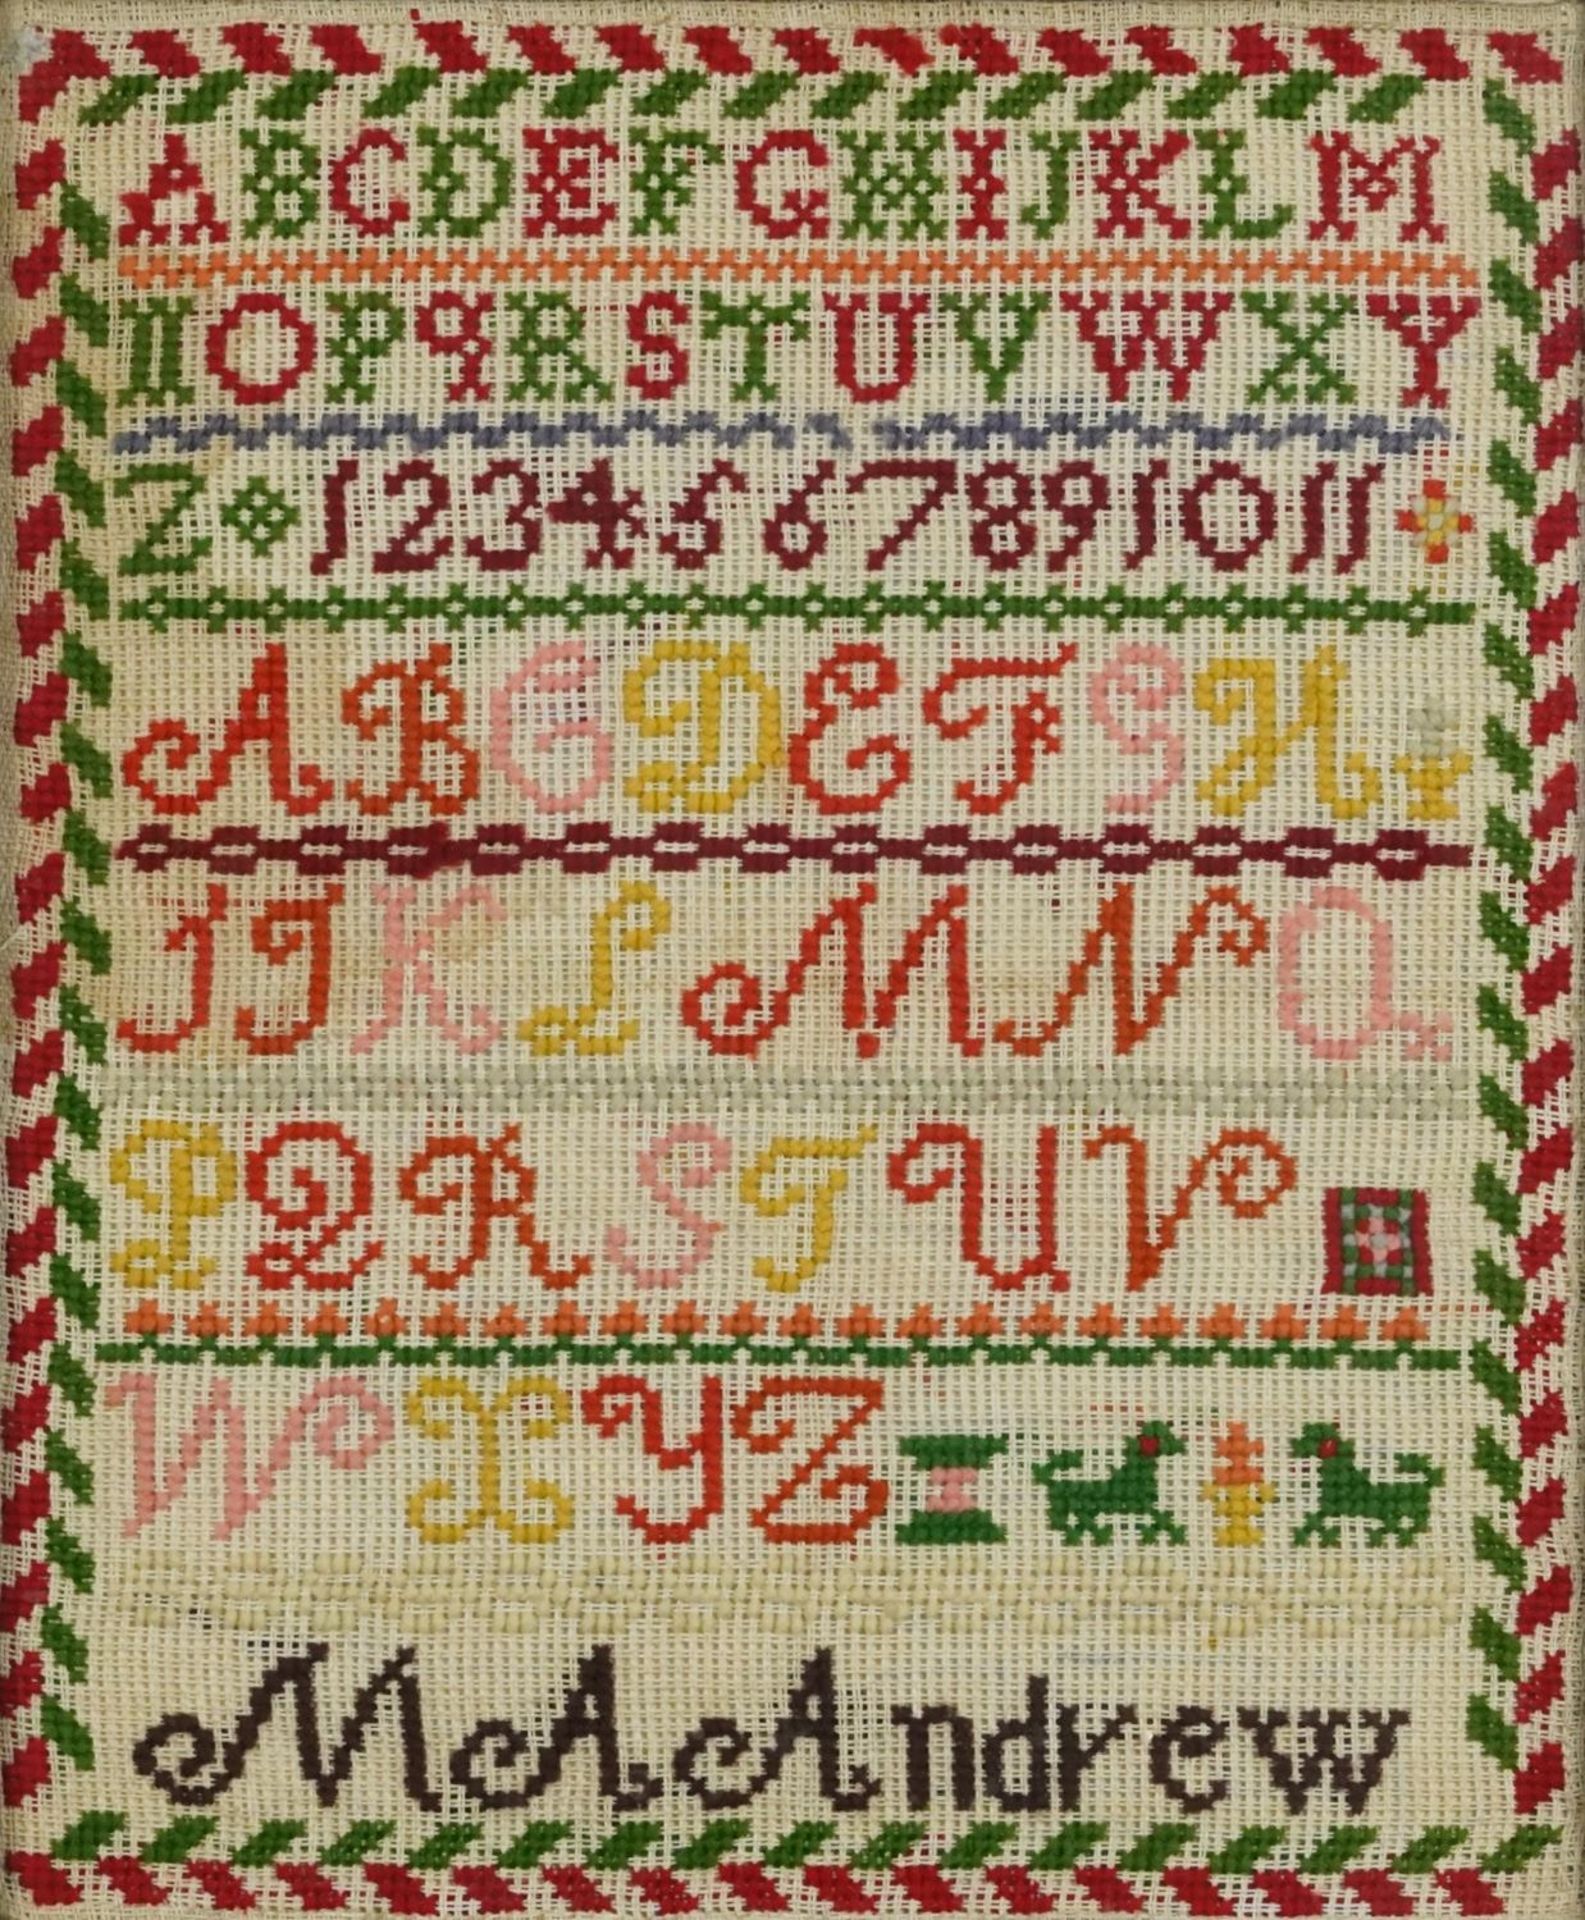 Needlework sampler worked by M A Andrew, framed and glazed, 31.5cm x 26cm excluding the frame